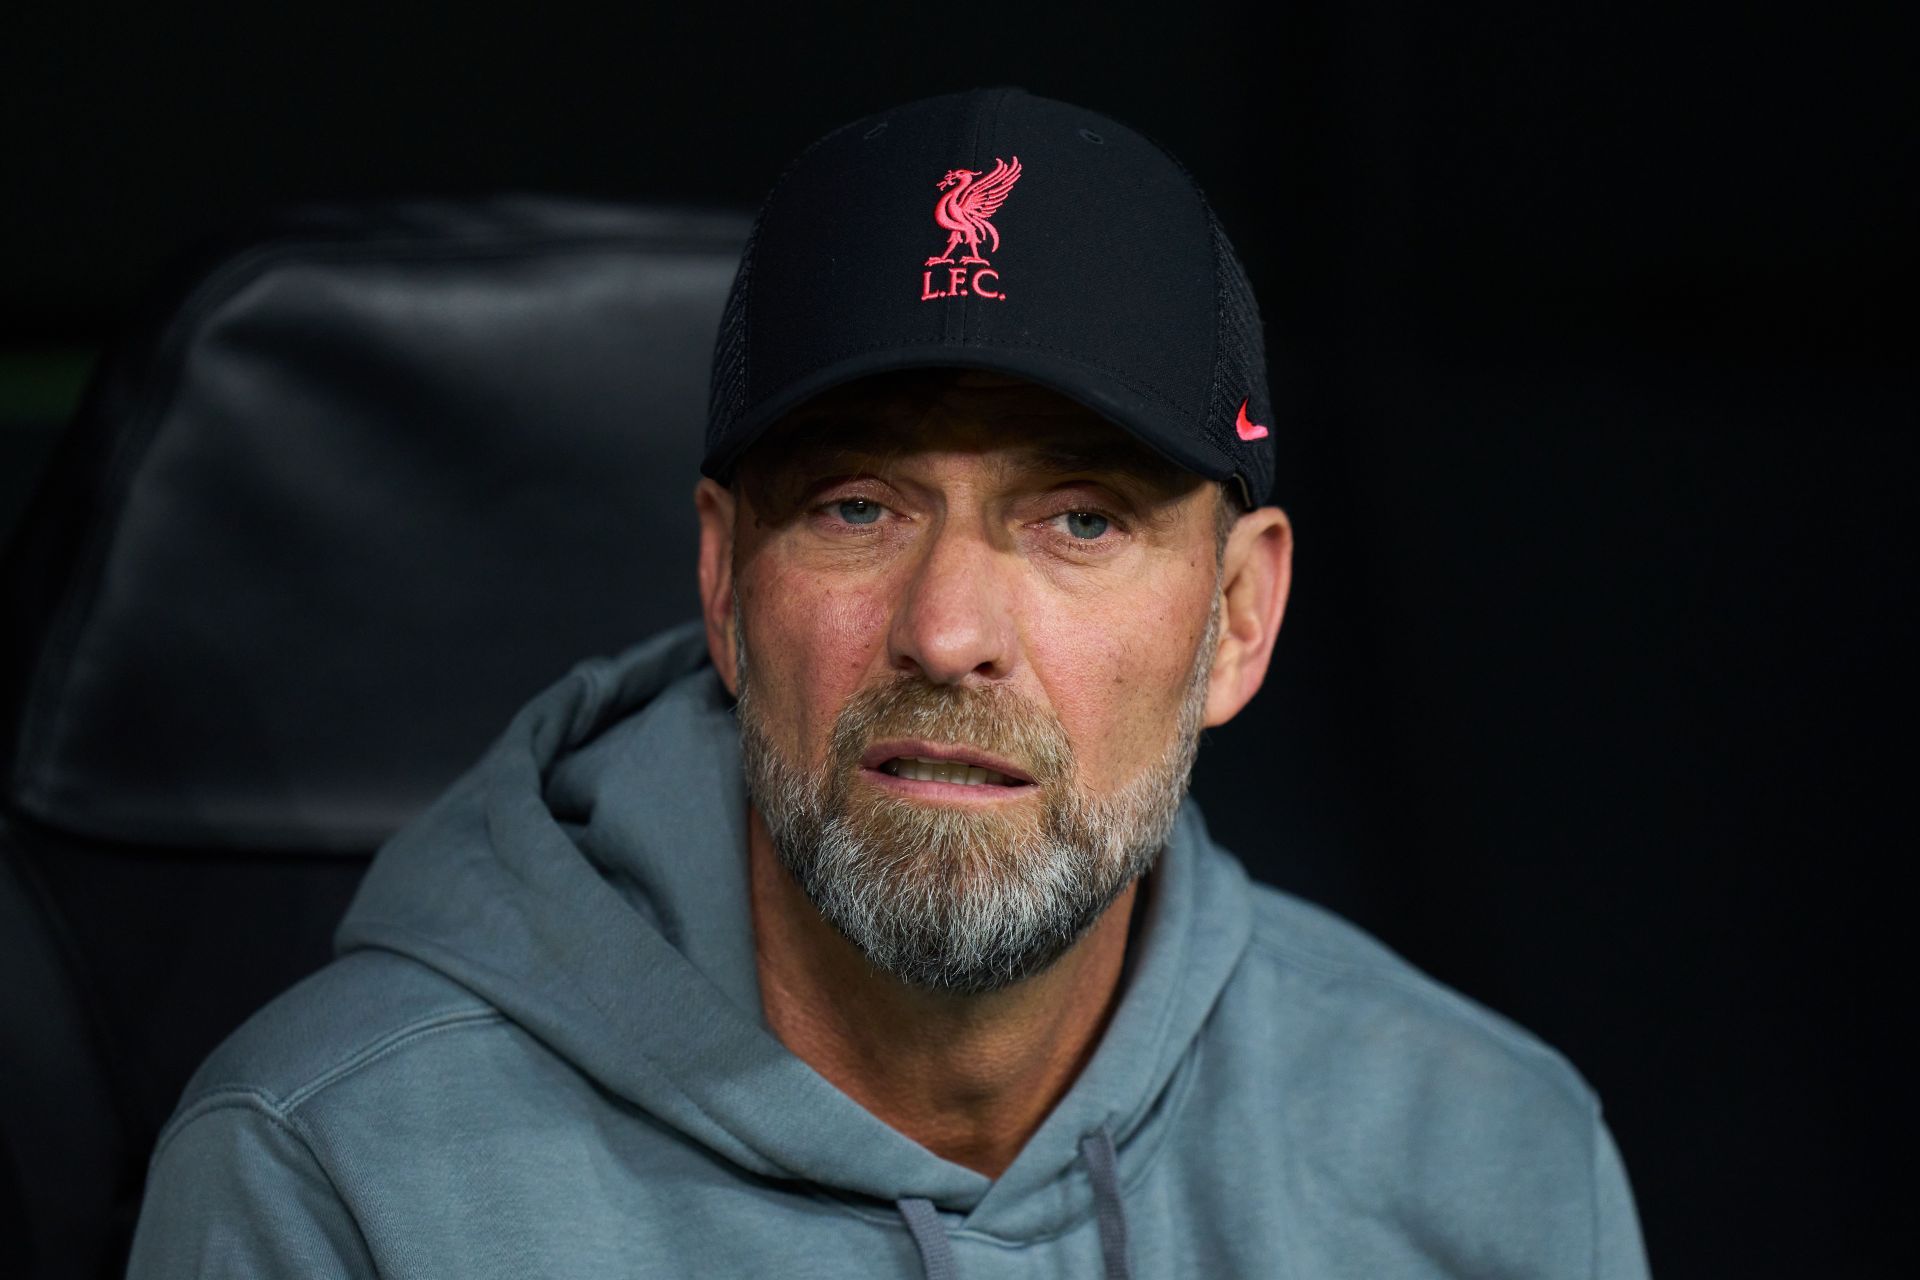 A host of injuries has made Klopp reconsider his pre-season plans.